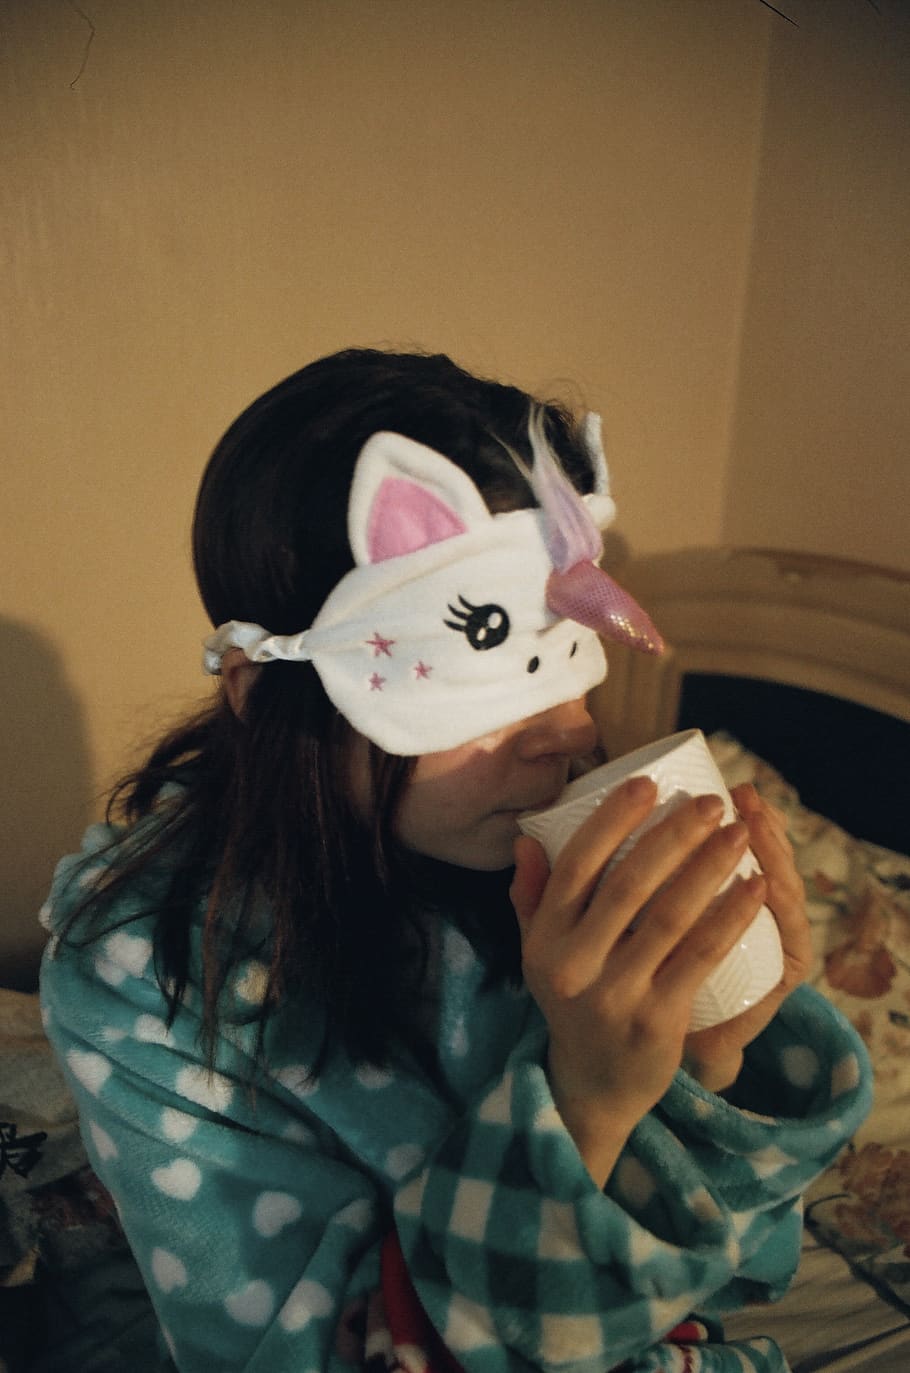 Woman Drinking on Cup While Blindfolded by Eye Mask, adolescence